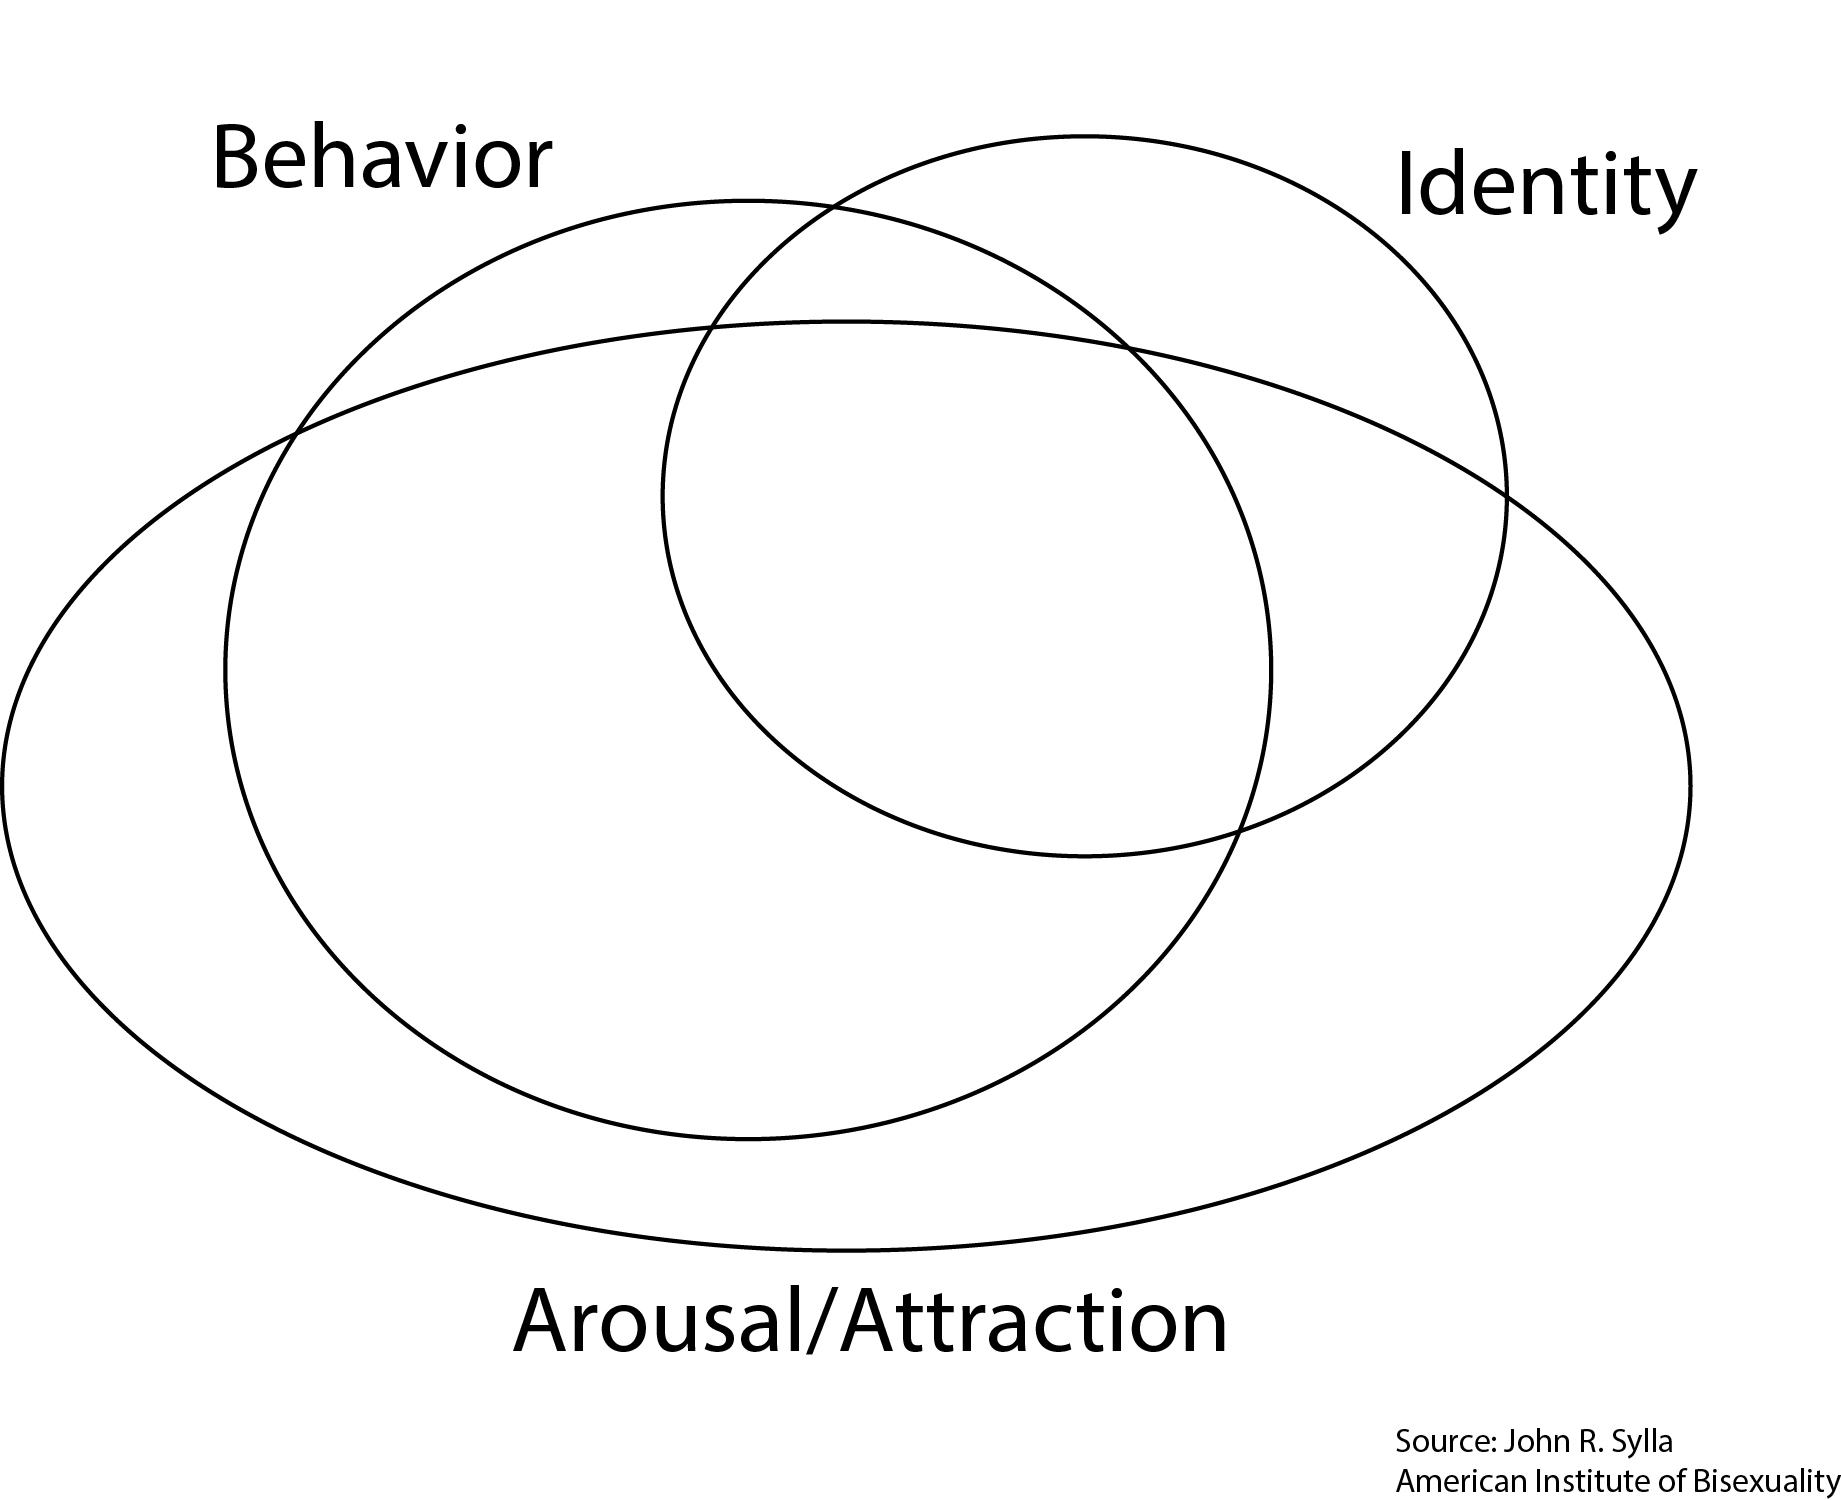 3 spheres intertwining of behavior identity and arousal and attraction.